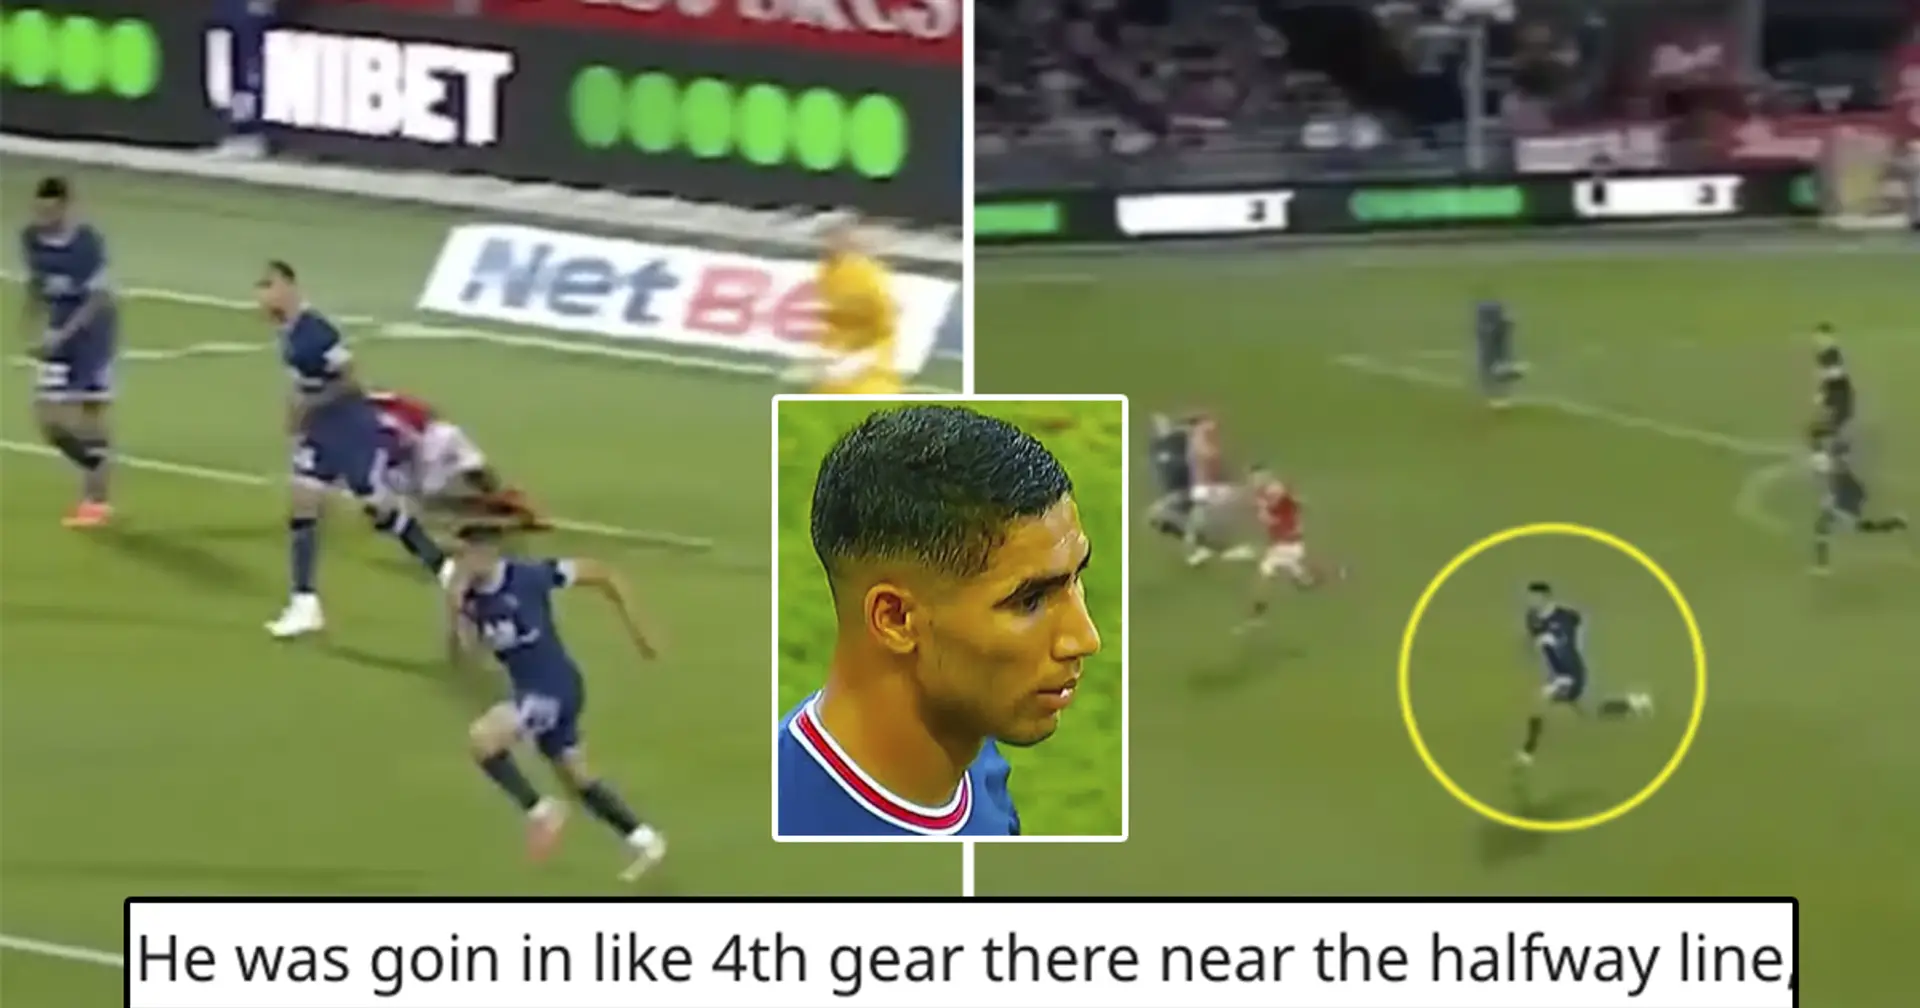 'You only know your right-back when you let him go': Madridista reacts as Hakimi's incredible run vs Brest goes viral